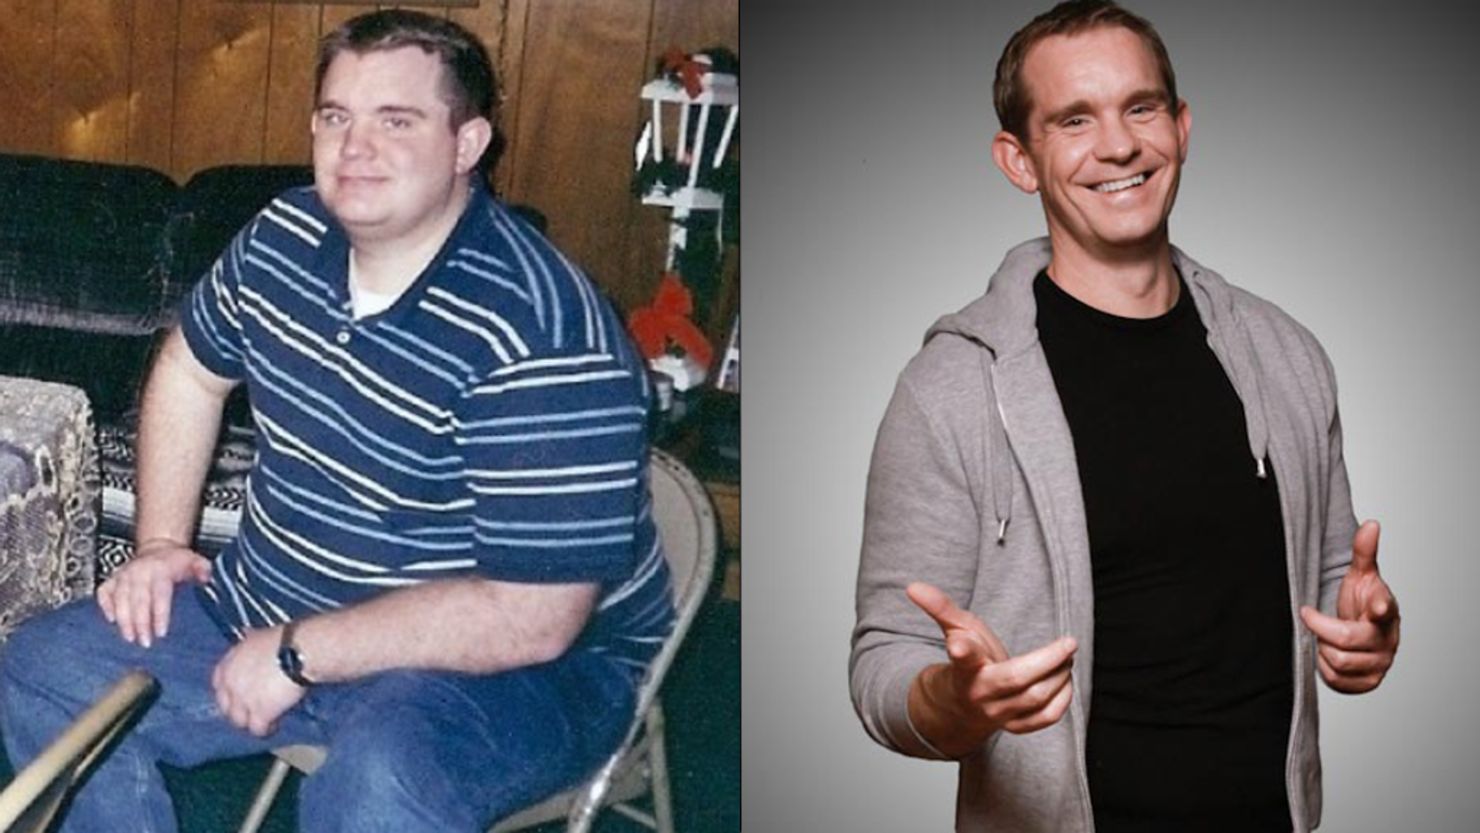 Kevin Evans made a life-changing transformation by losing weight and following a steady meal plan and exercise routine. 